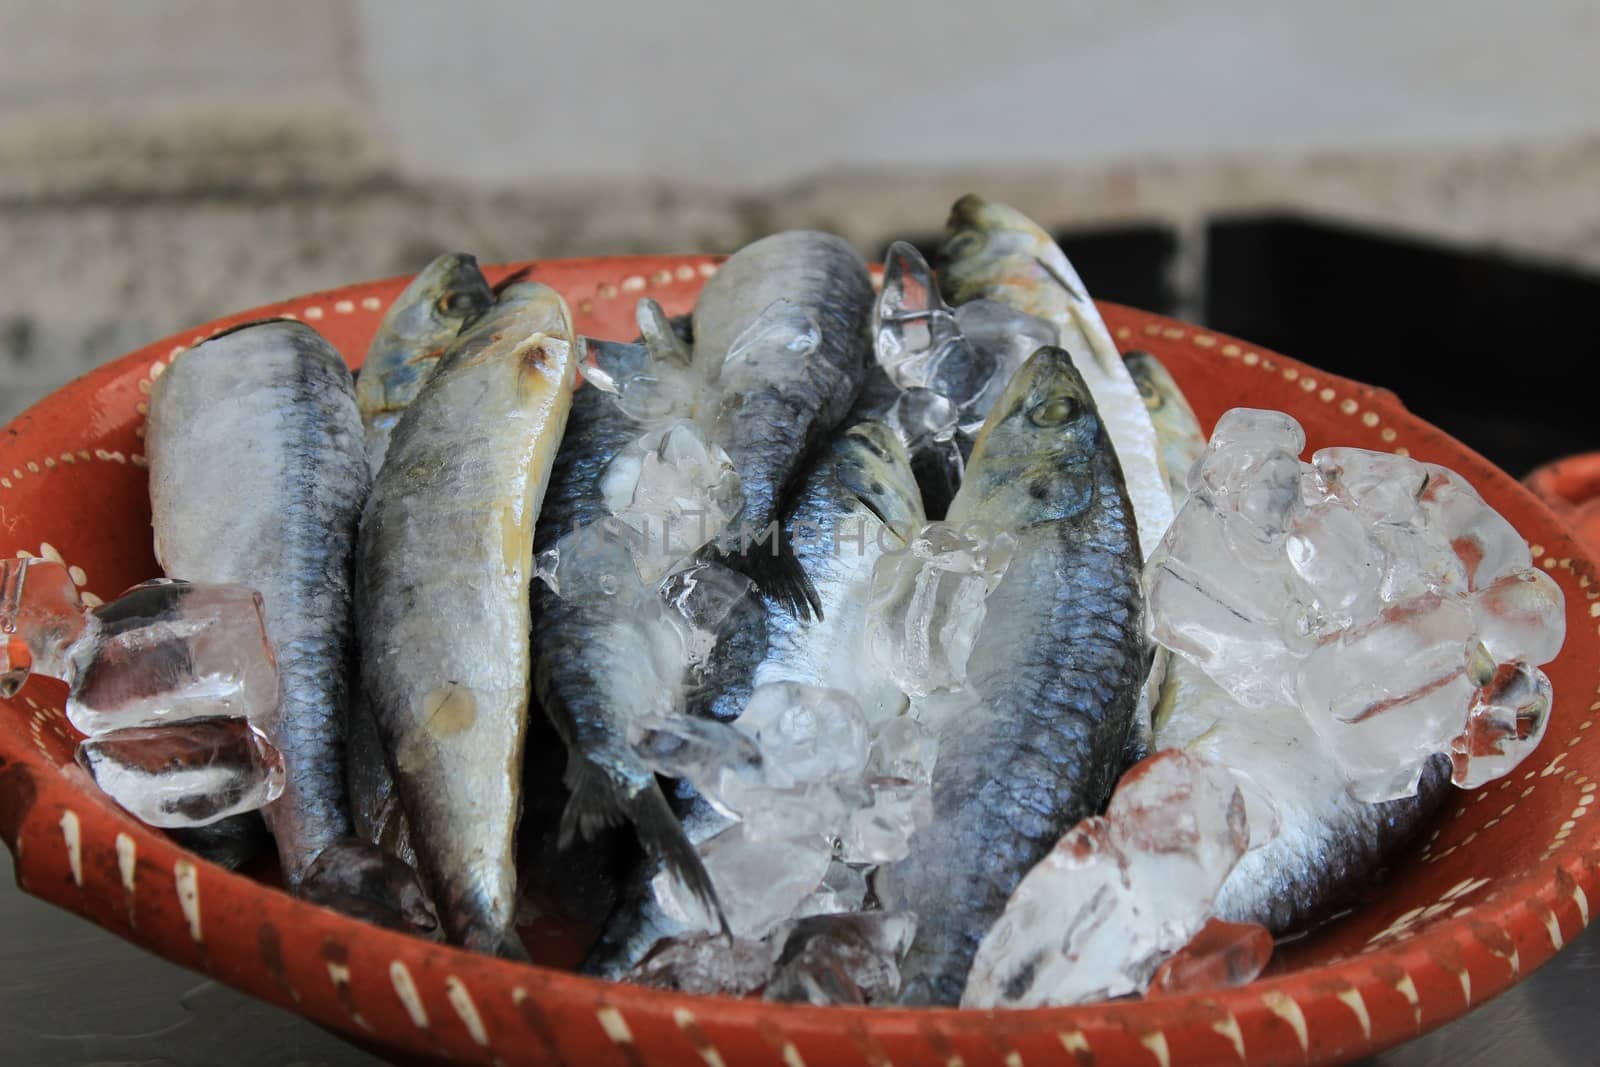 Sardines with ice on plate in Lisbon by soniabonet